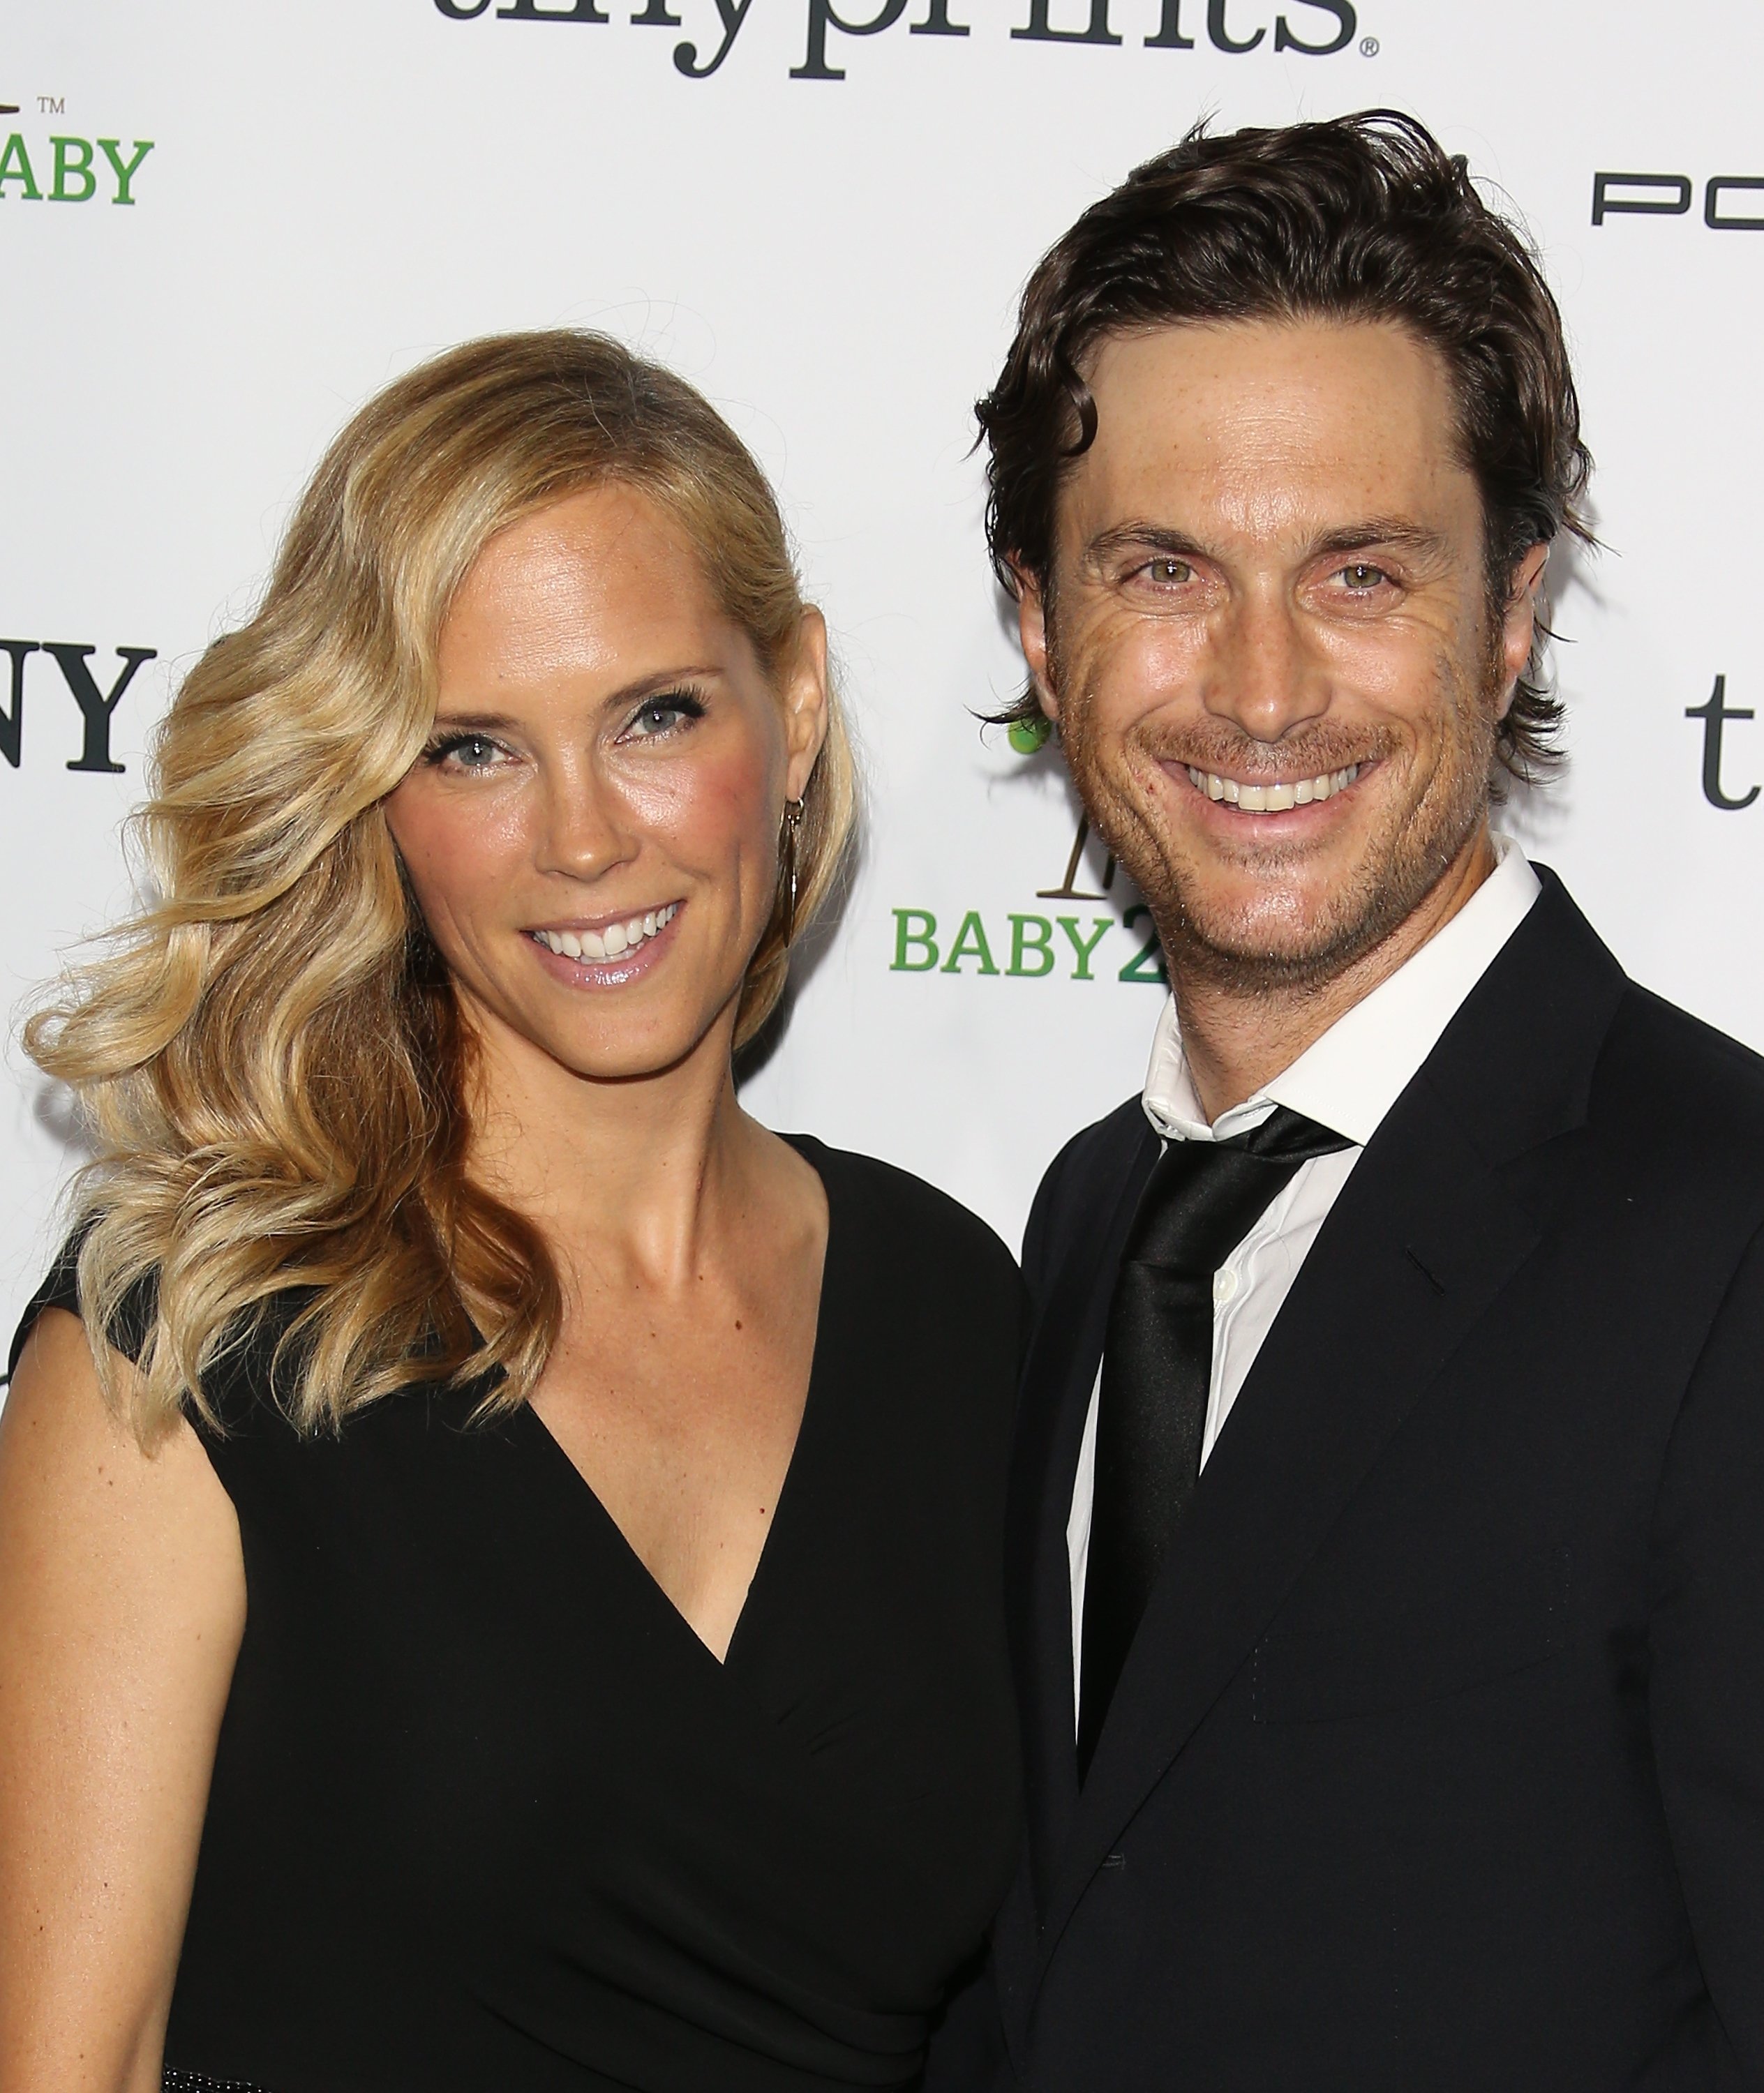 Erin Bartlett and Oliver Hudson at the 2014 Baby2Baby Gala on November 8, 2014 | Photo: Getty Images